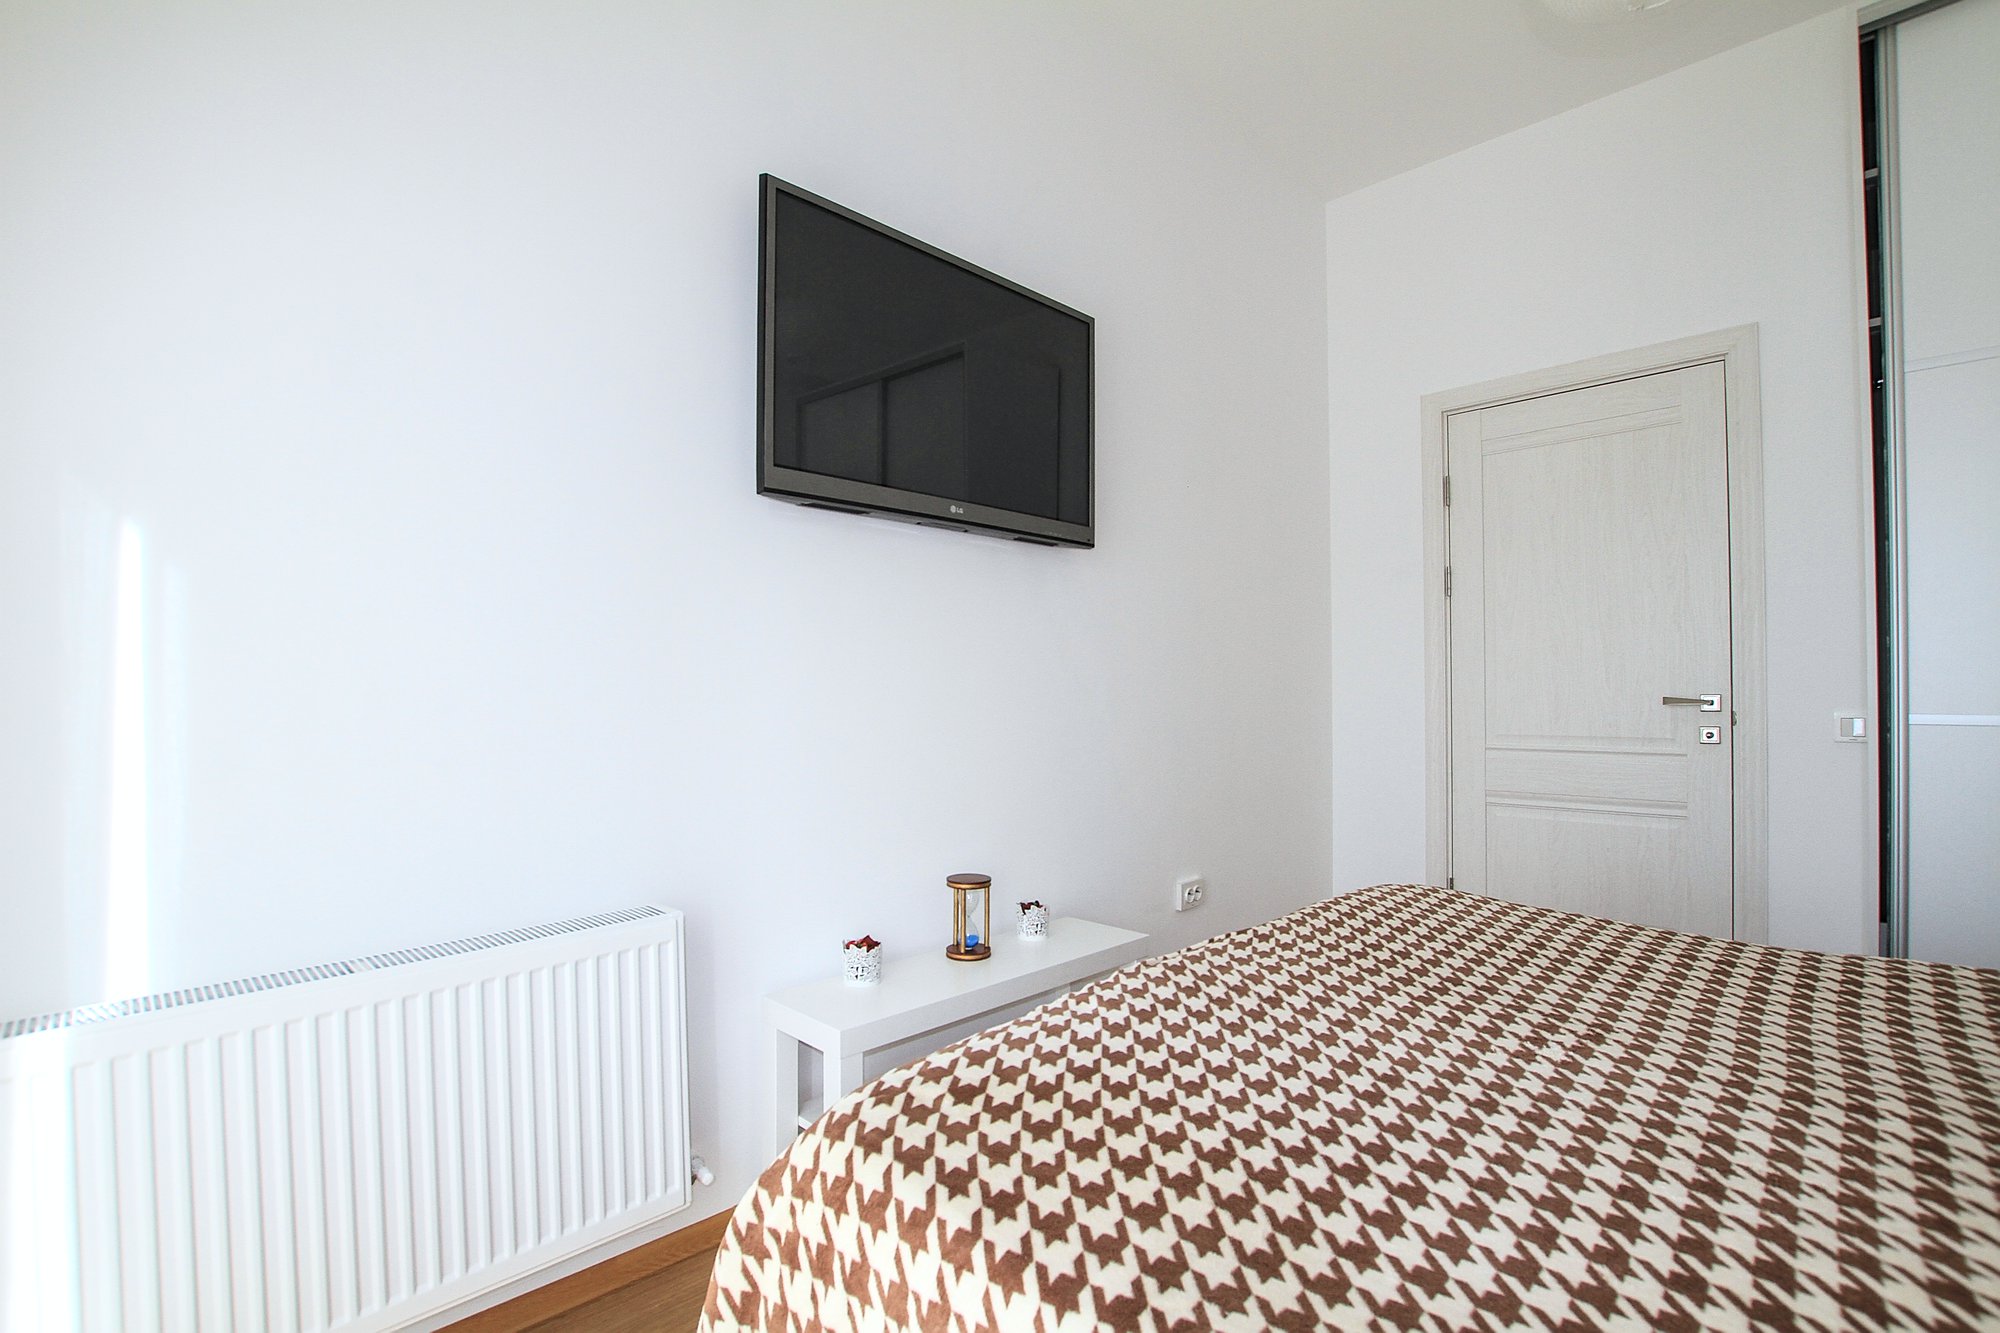 Old Town Studio is a 1 room apartment for rent in Chisinau, Moldova